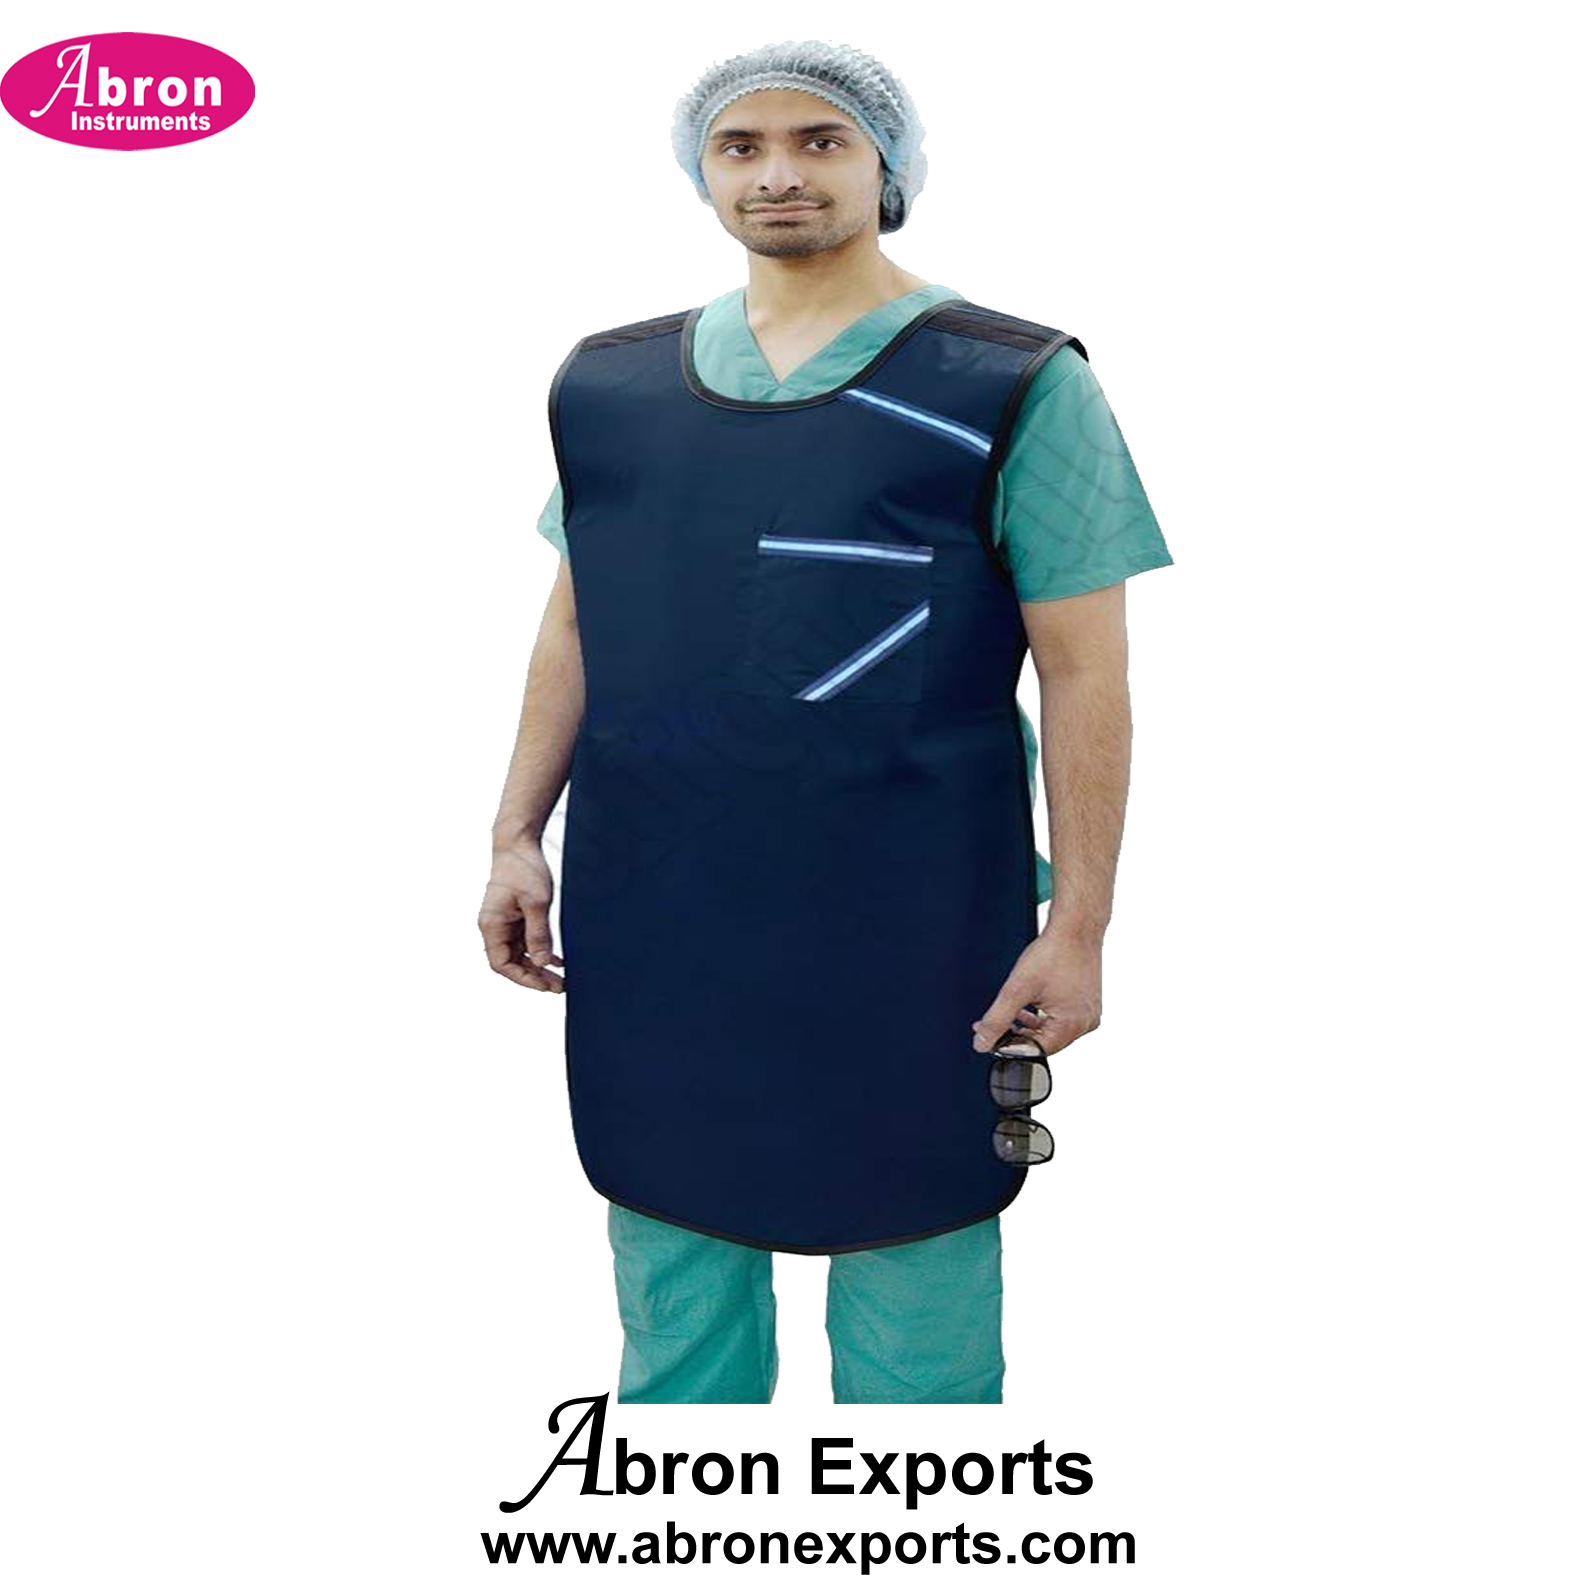 Ortho X-ray lead Apron Absorber for Body xray Body shield 0.5mm inside cover Clinical Hospital Nursing home Abron ABM-2780A  